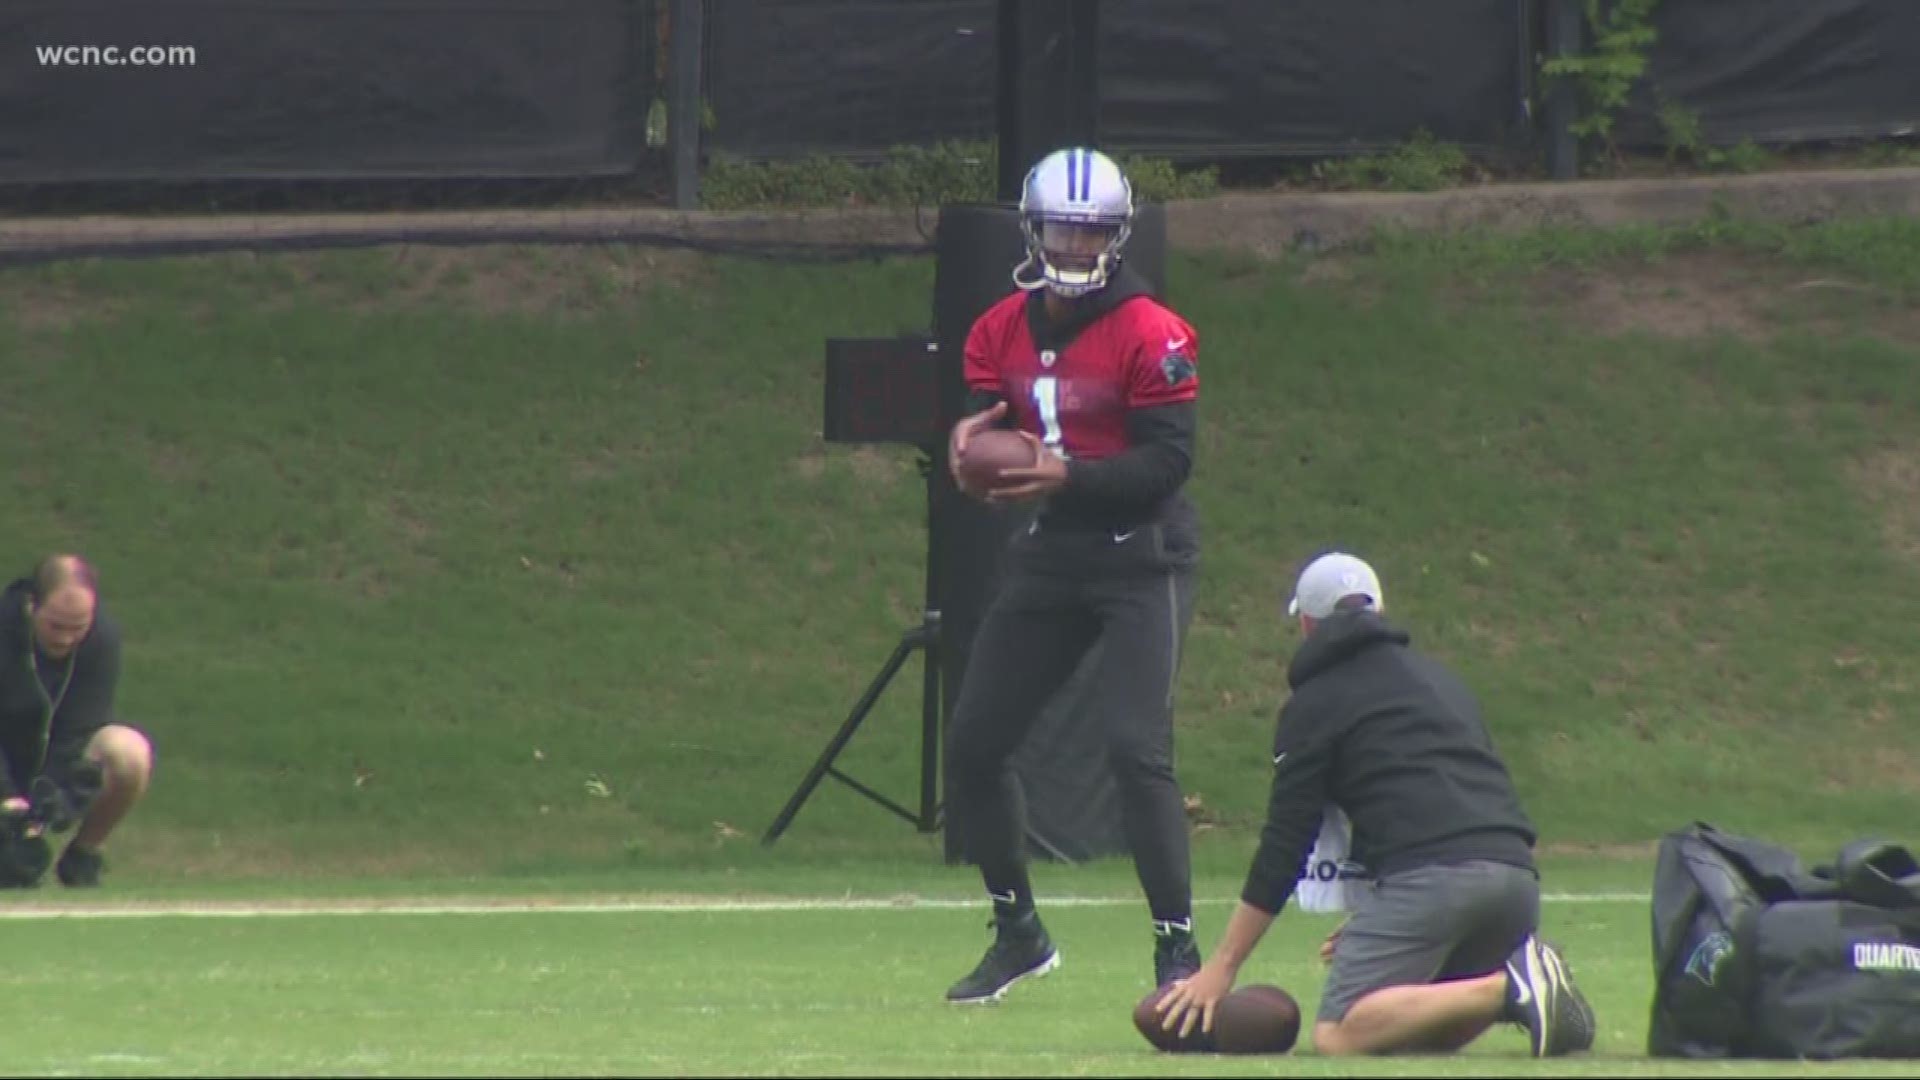 The Panthers continued minicamp practices Wednesday, and Cam Newton continued throwing. The team is optimistic about the star quarterback's return from shoulder surgery. He's even changed his throwing motion.